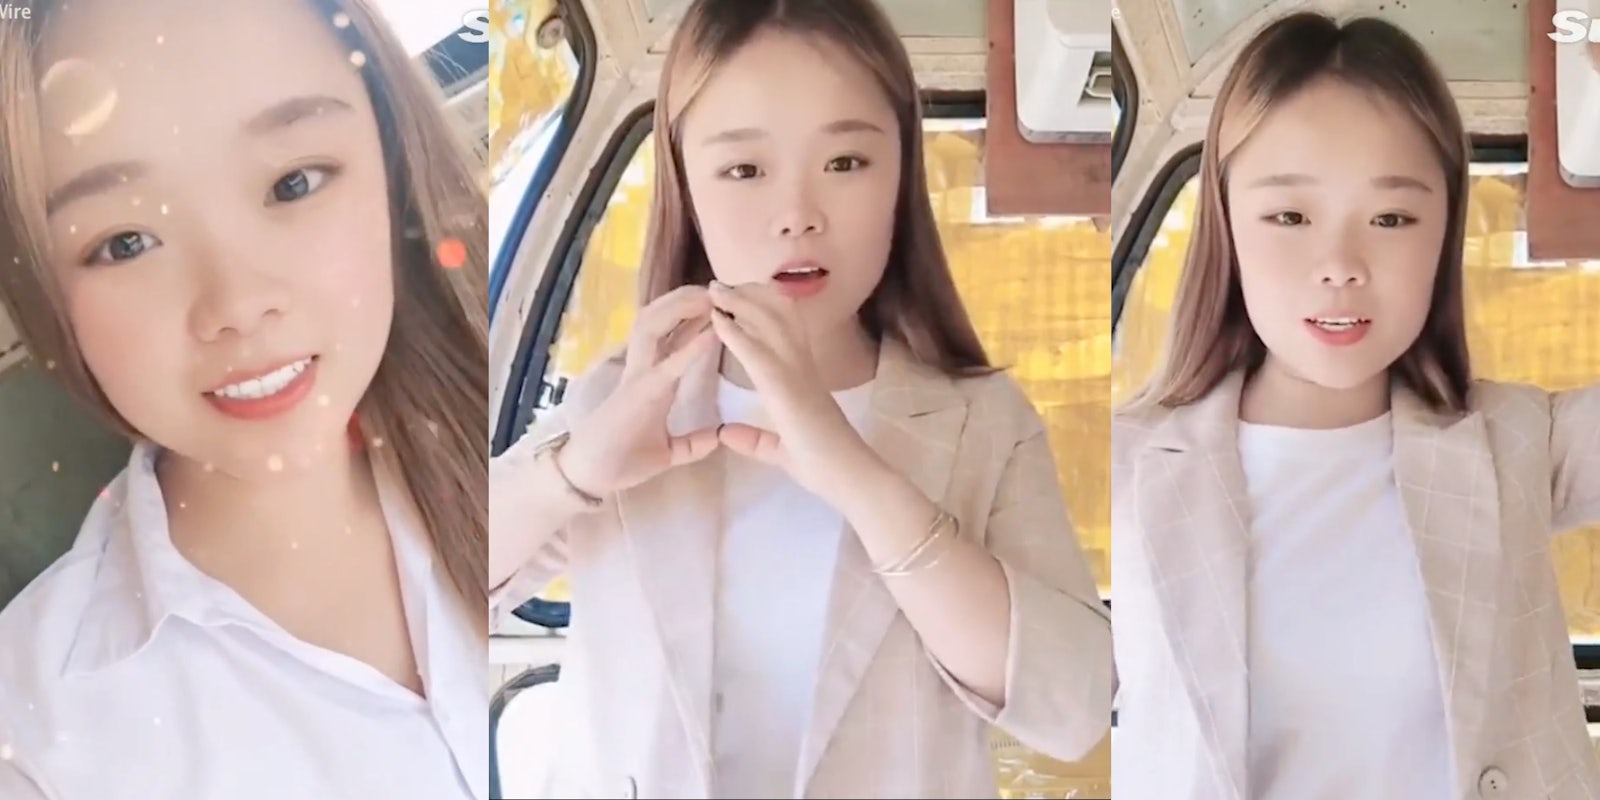 TikTok Star Xiao Qiumei Dies After Falling 160 Feet During Live Stream